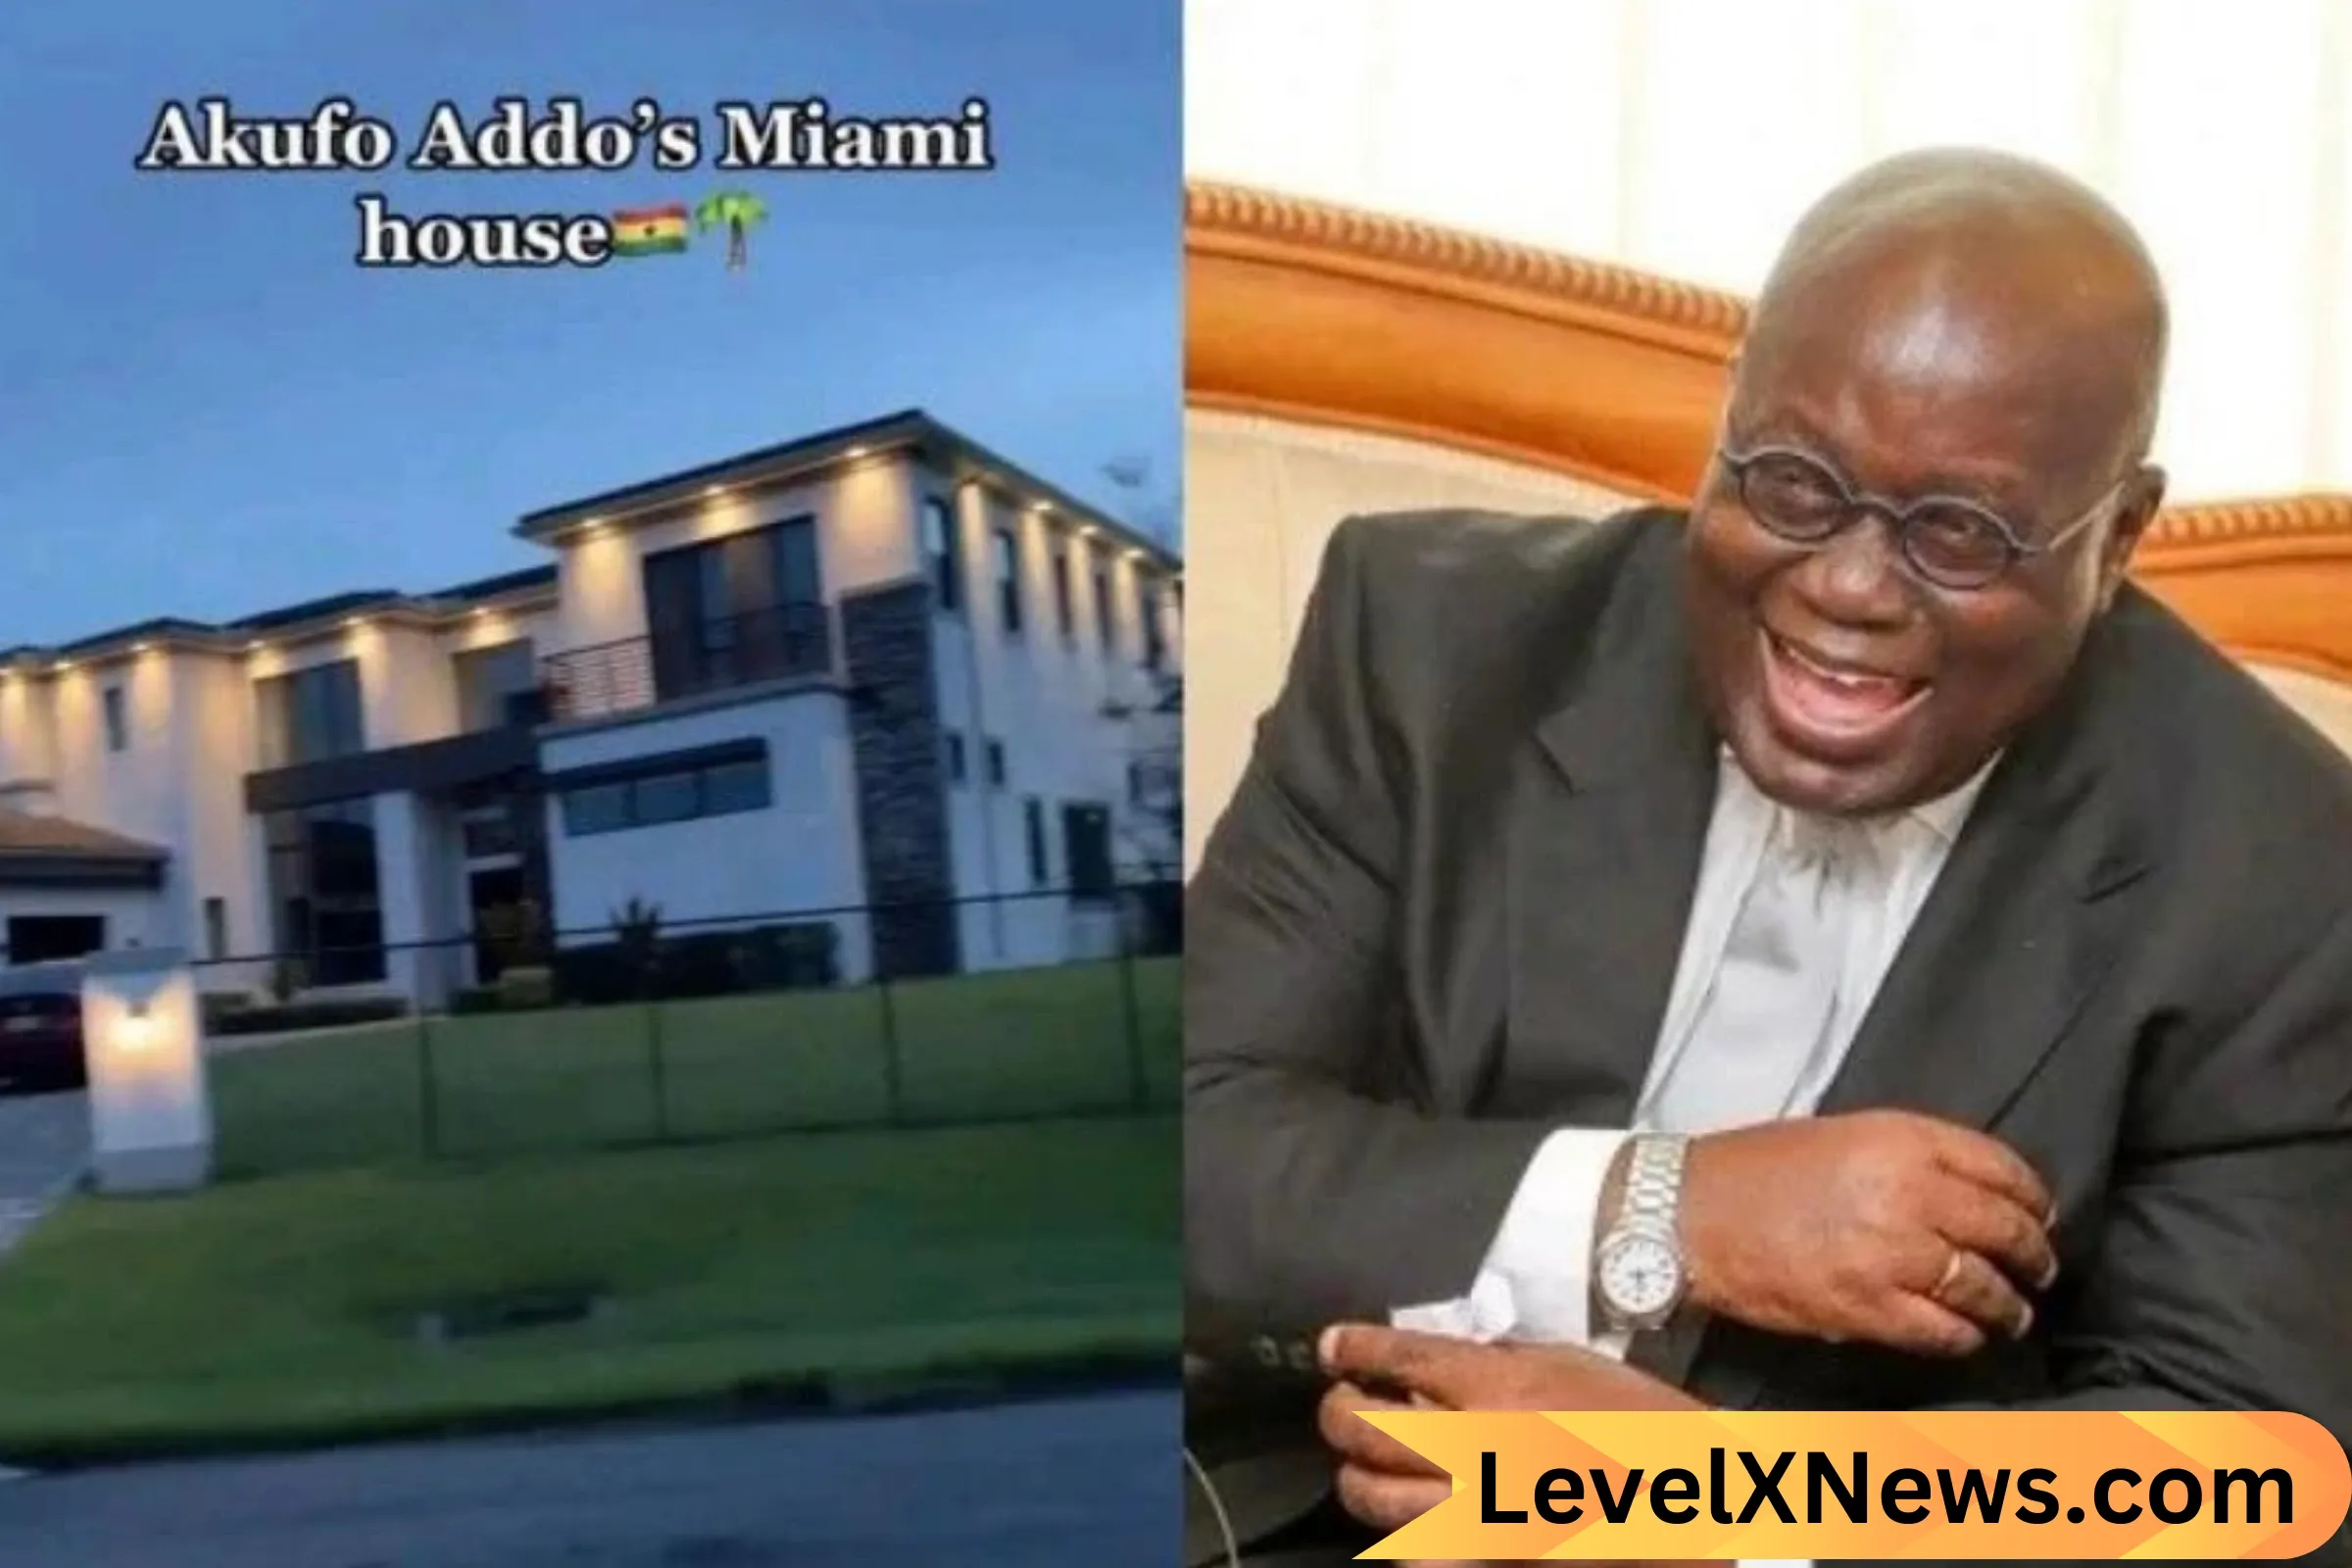 Is This Nana Akufo-Addo's Miami House? Viral Video Sparks Controversy